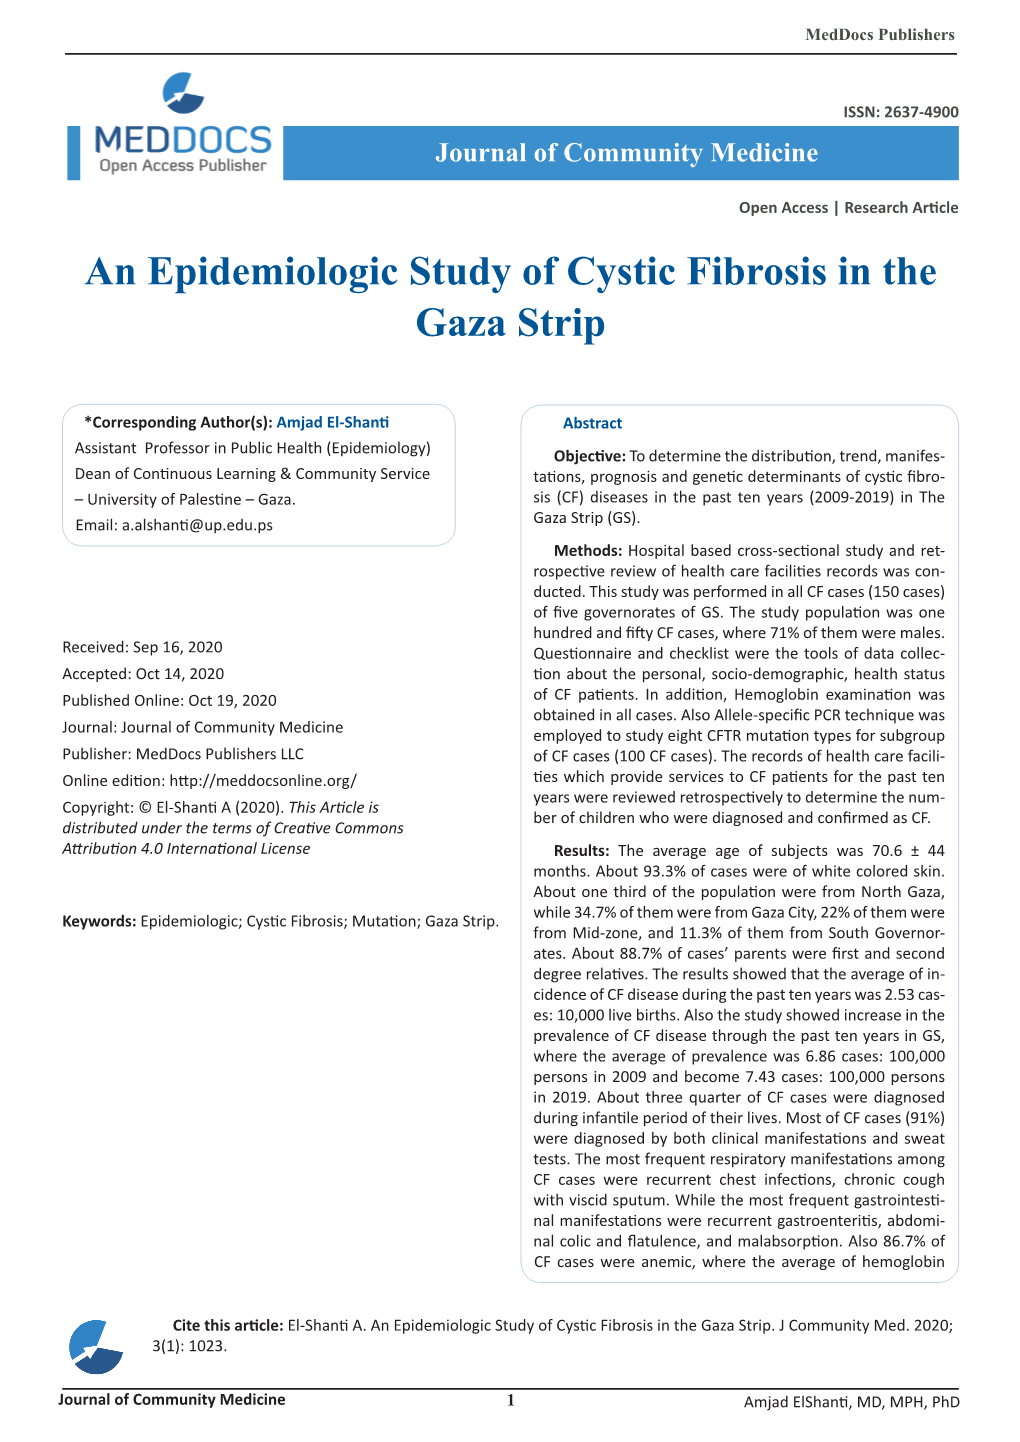 An Epidemiologic Study of Cystic Fibrosis in the Gaza Strip